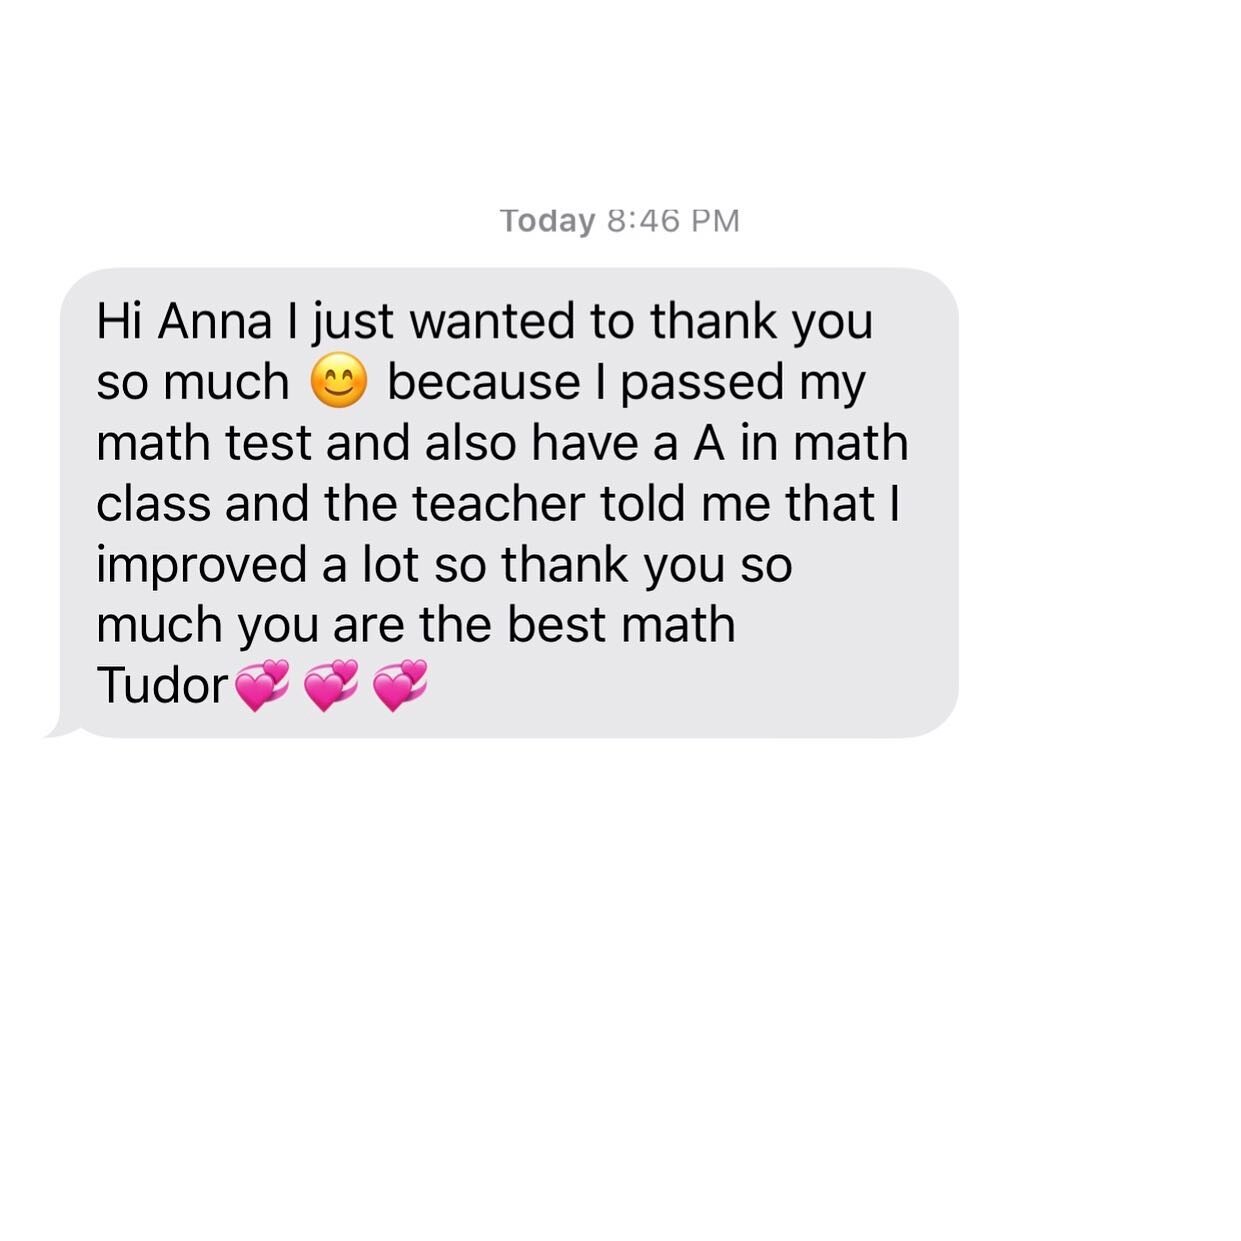 What a sweet text from a student yesterday...so heartwarming! ❤️